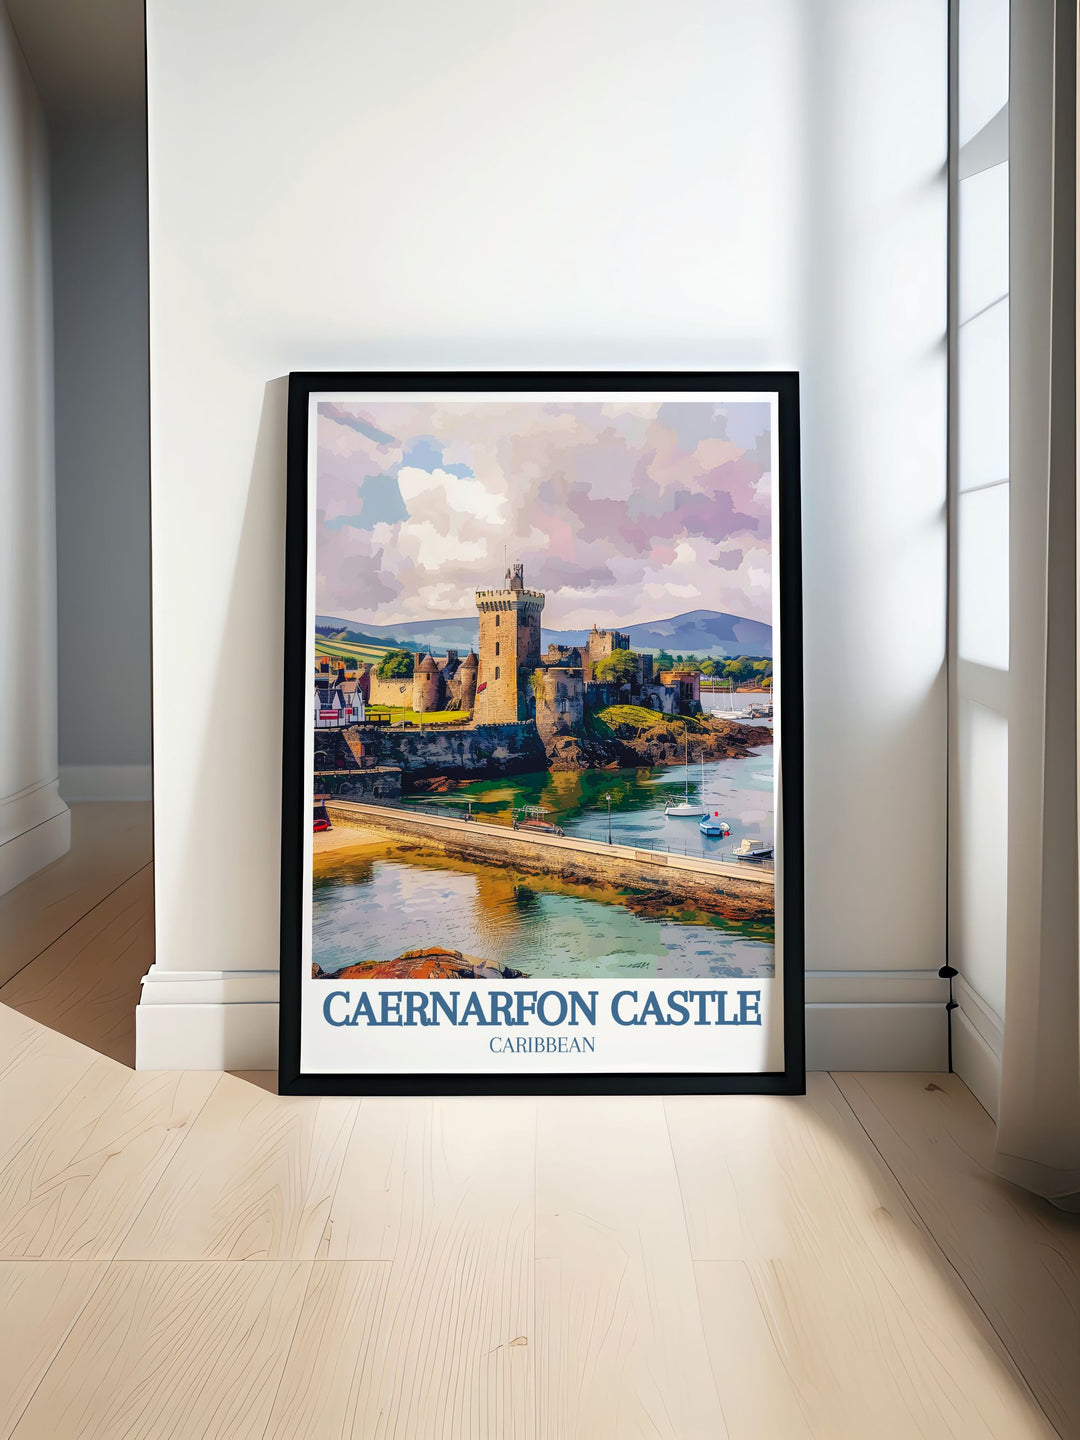 Stunning Caernarfon Castle print highlighting the majestic fortress, the scenic Menai Strait, and the rugged Snowdonia Ranger path, ideal for history enthusiasts and nature lovers.